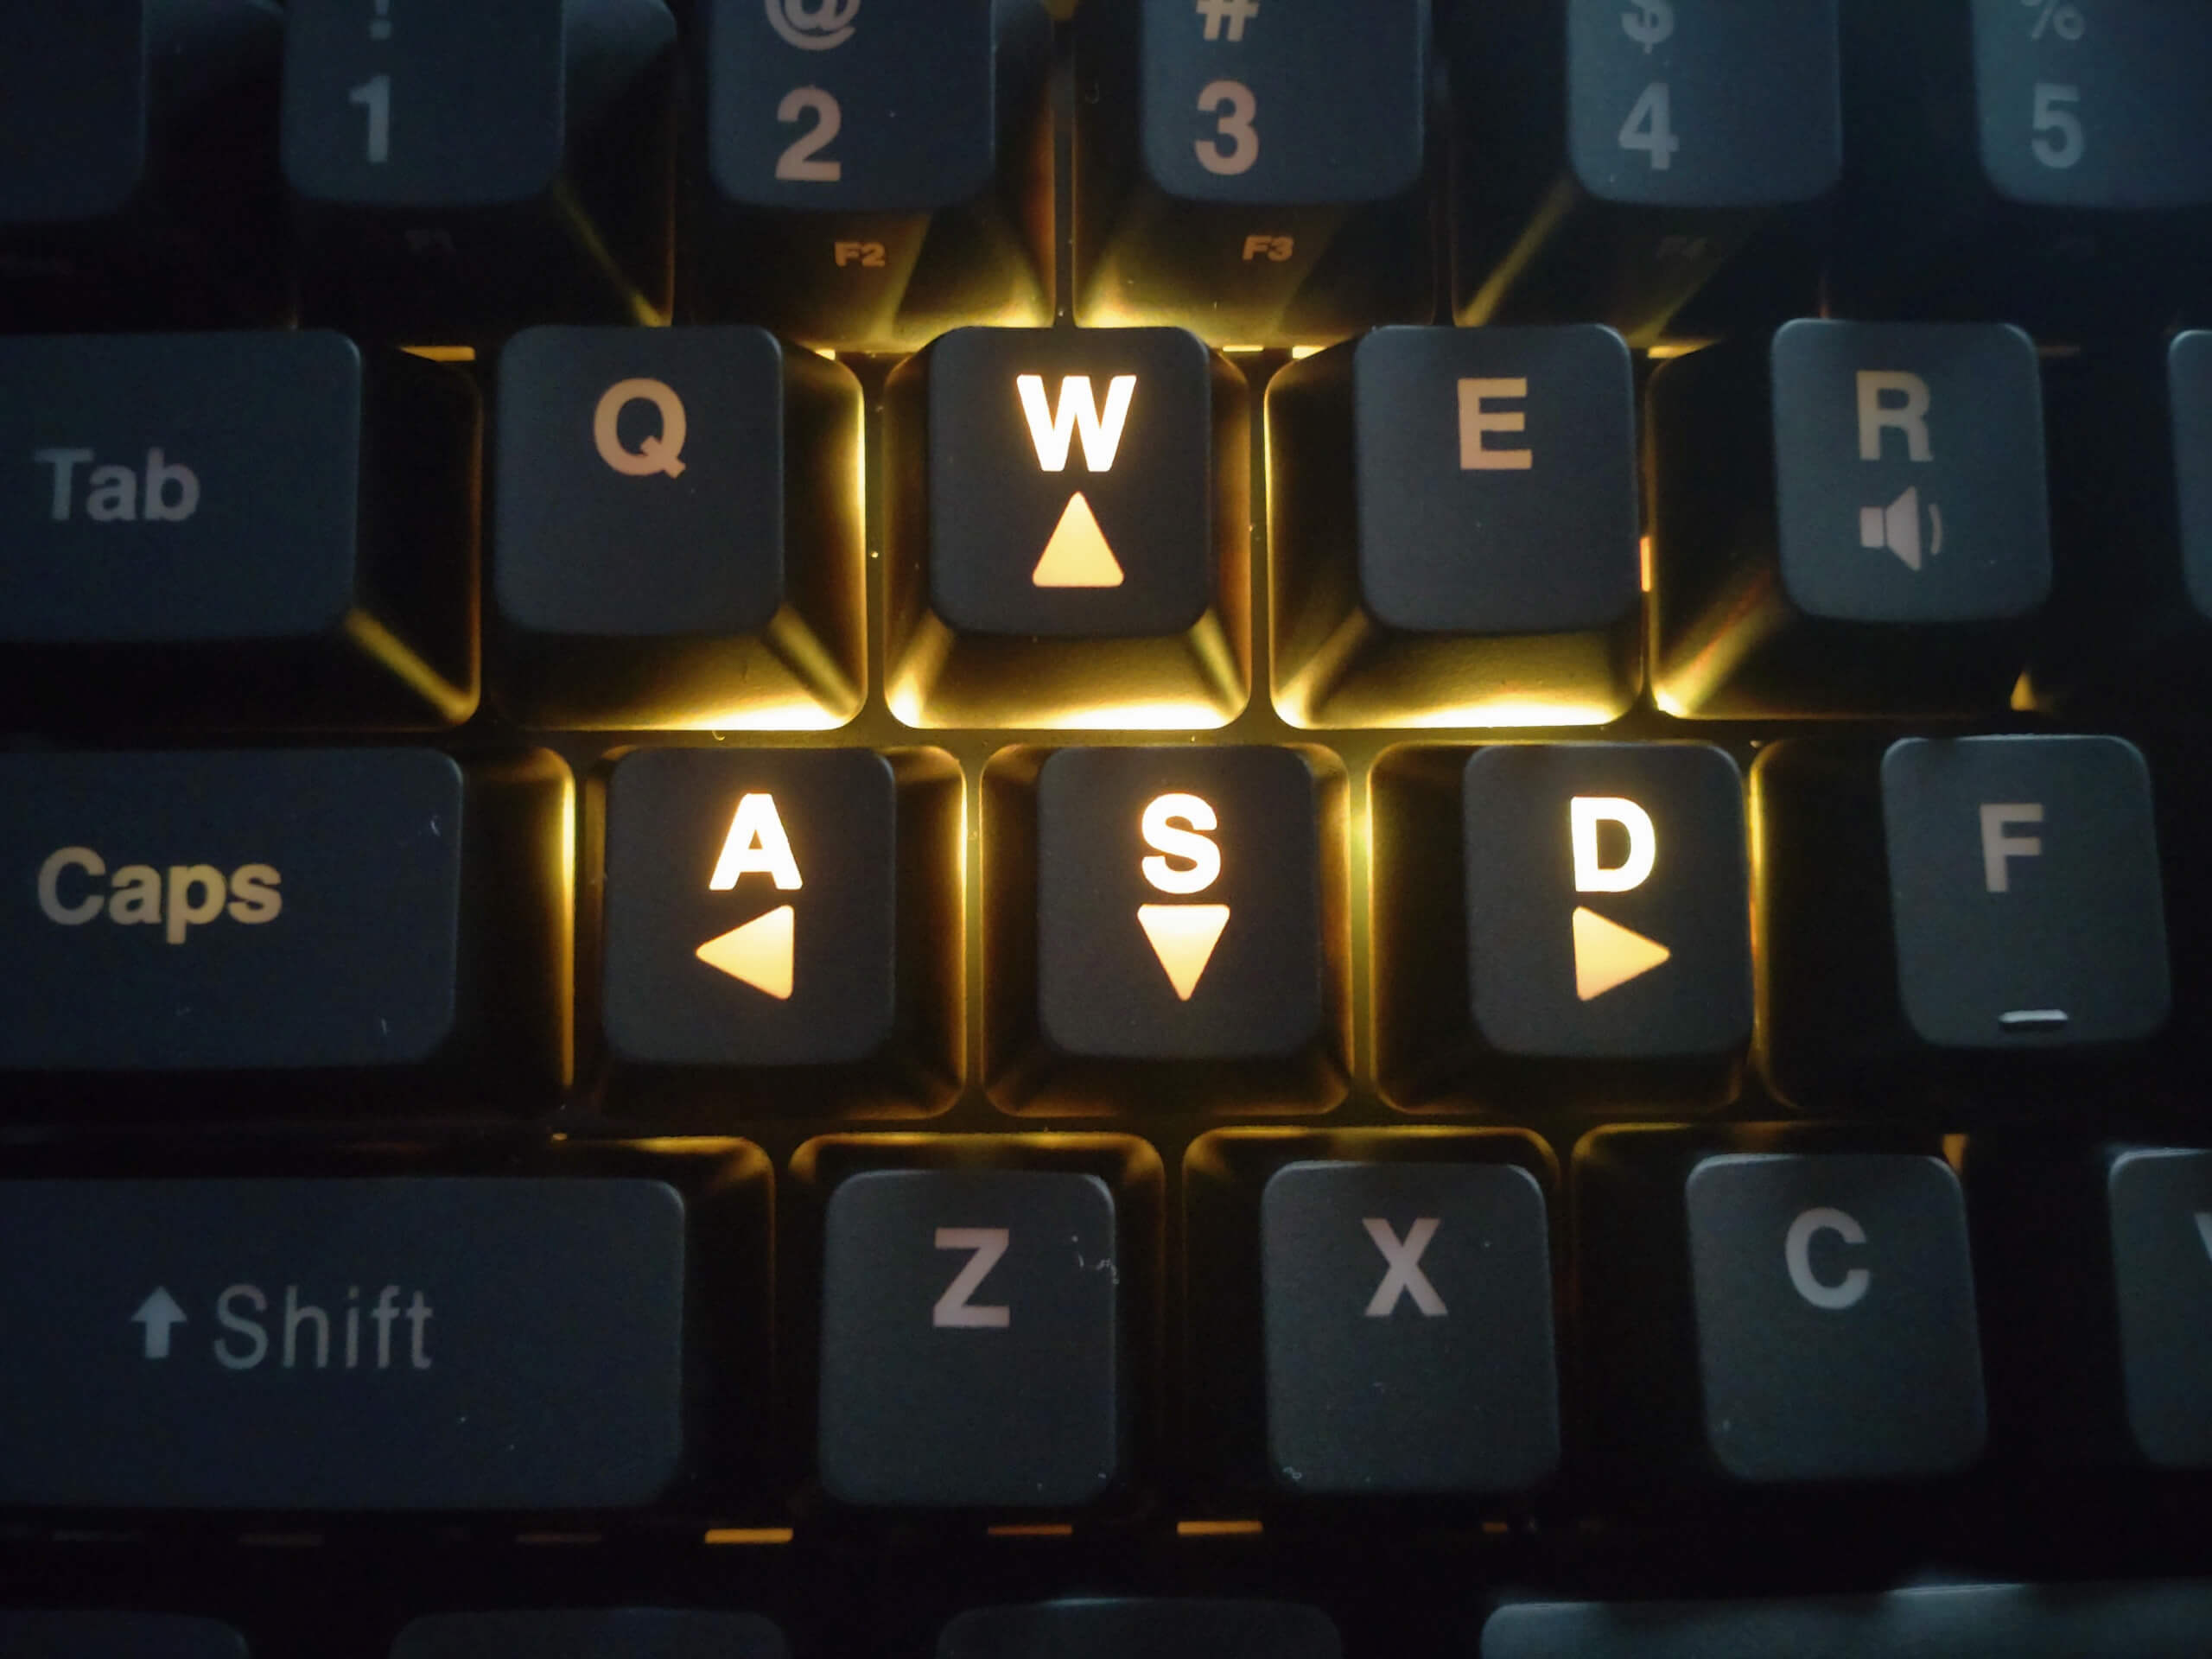 A closeup of the WASD keys on the keyboard. The rest of the key's lights are off, while the WASD keys are glowing gold.